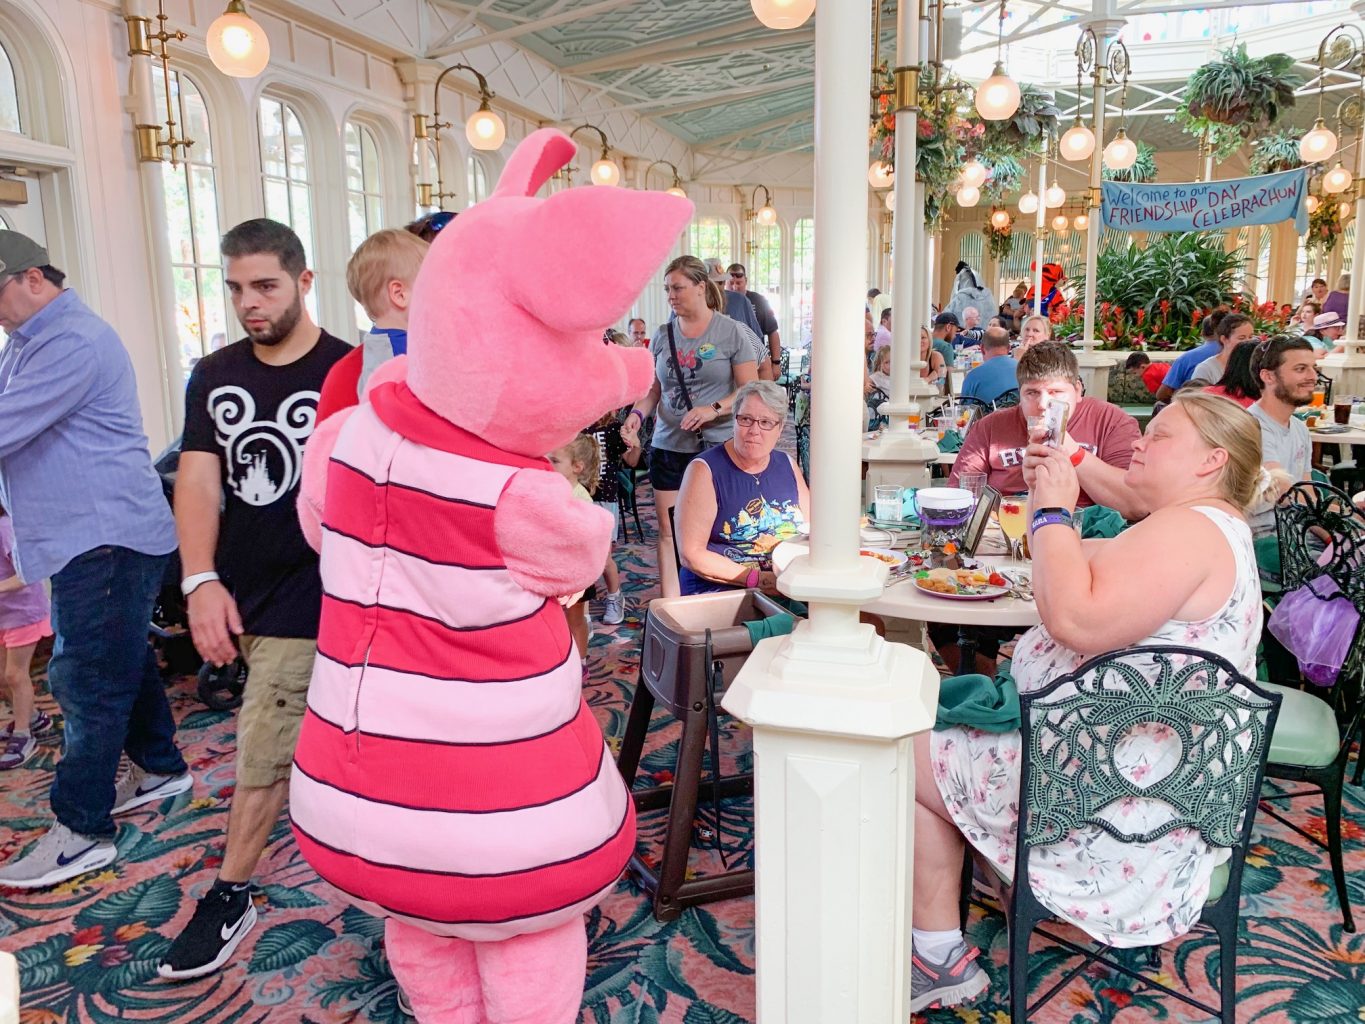 Piglet spending time at a table full of guests Disney character dining